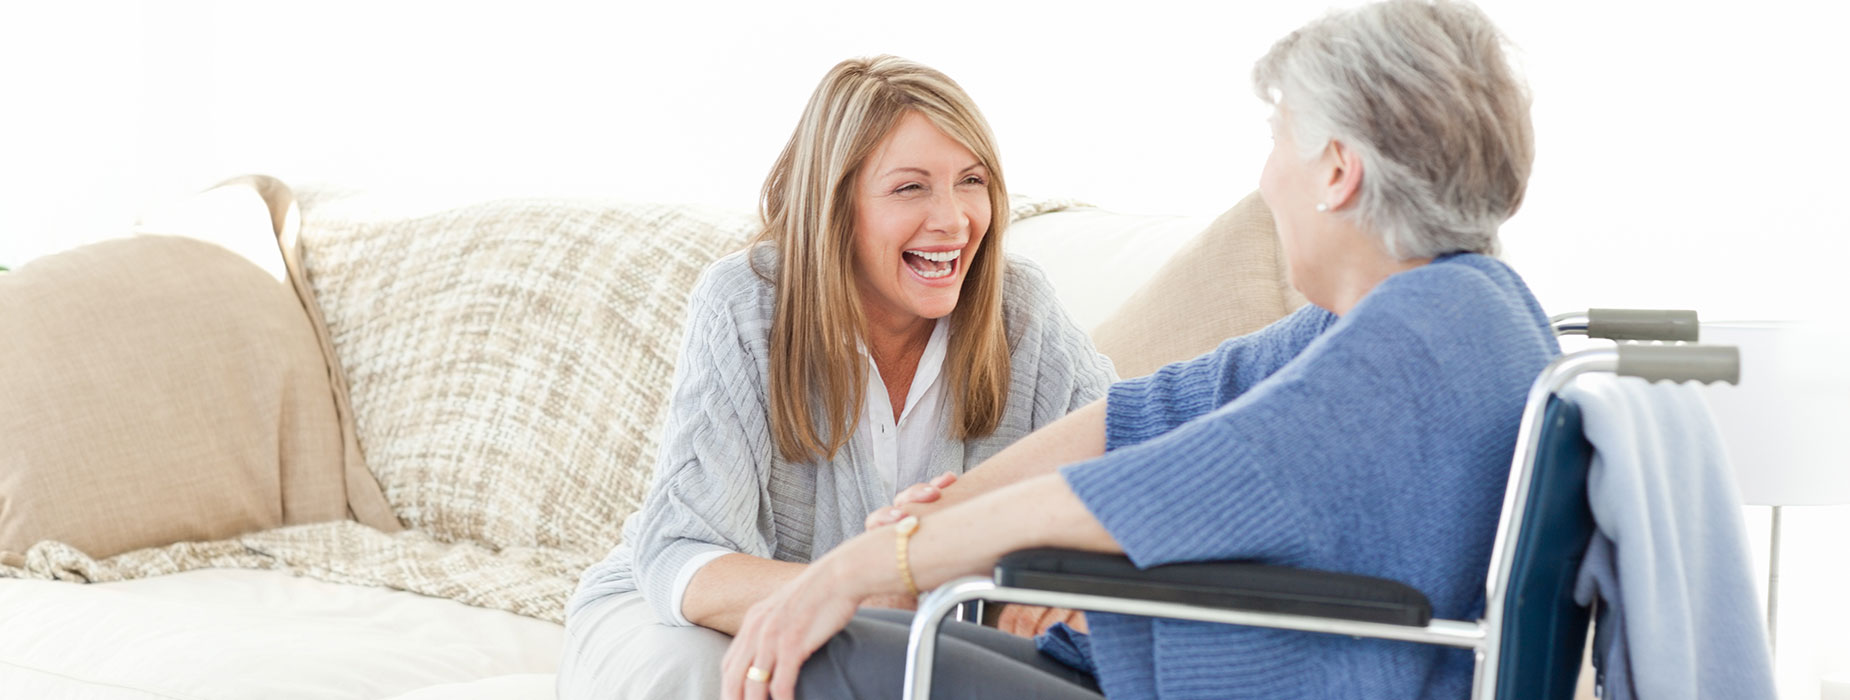 All-In-One Health & Home Services offers home care to seniors in locations in and around Kelowna, BC.